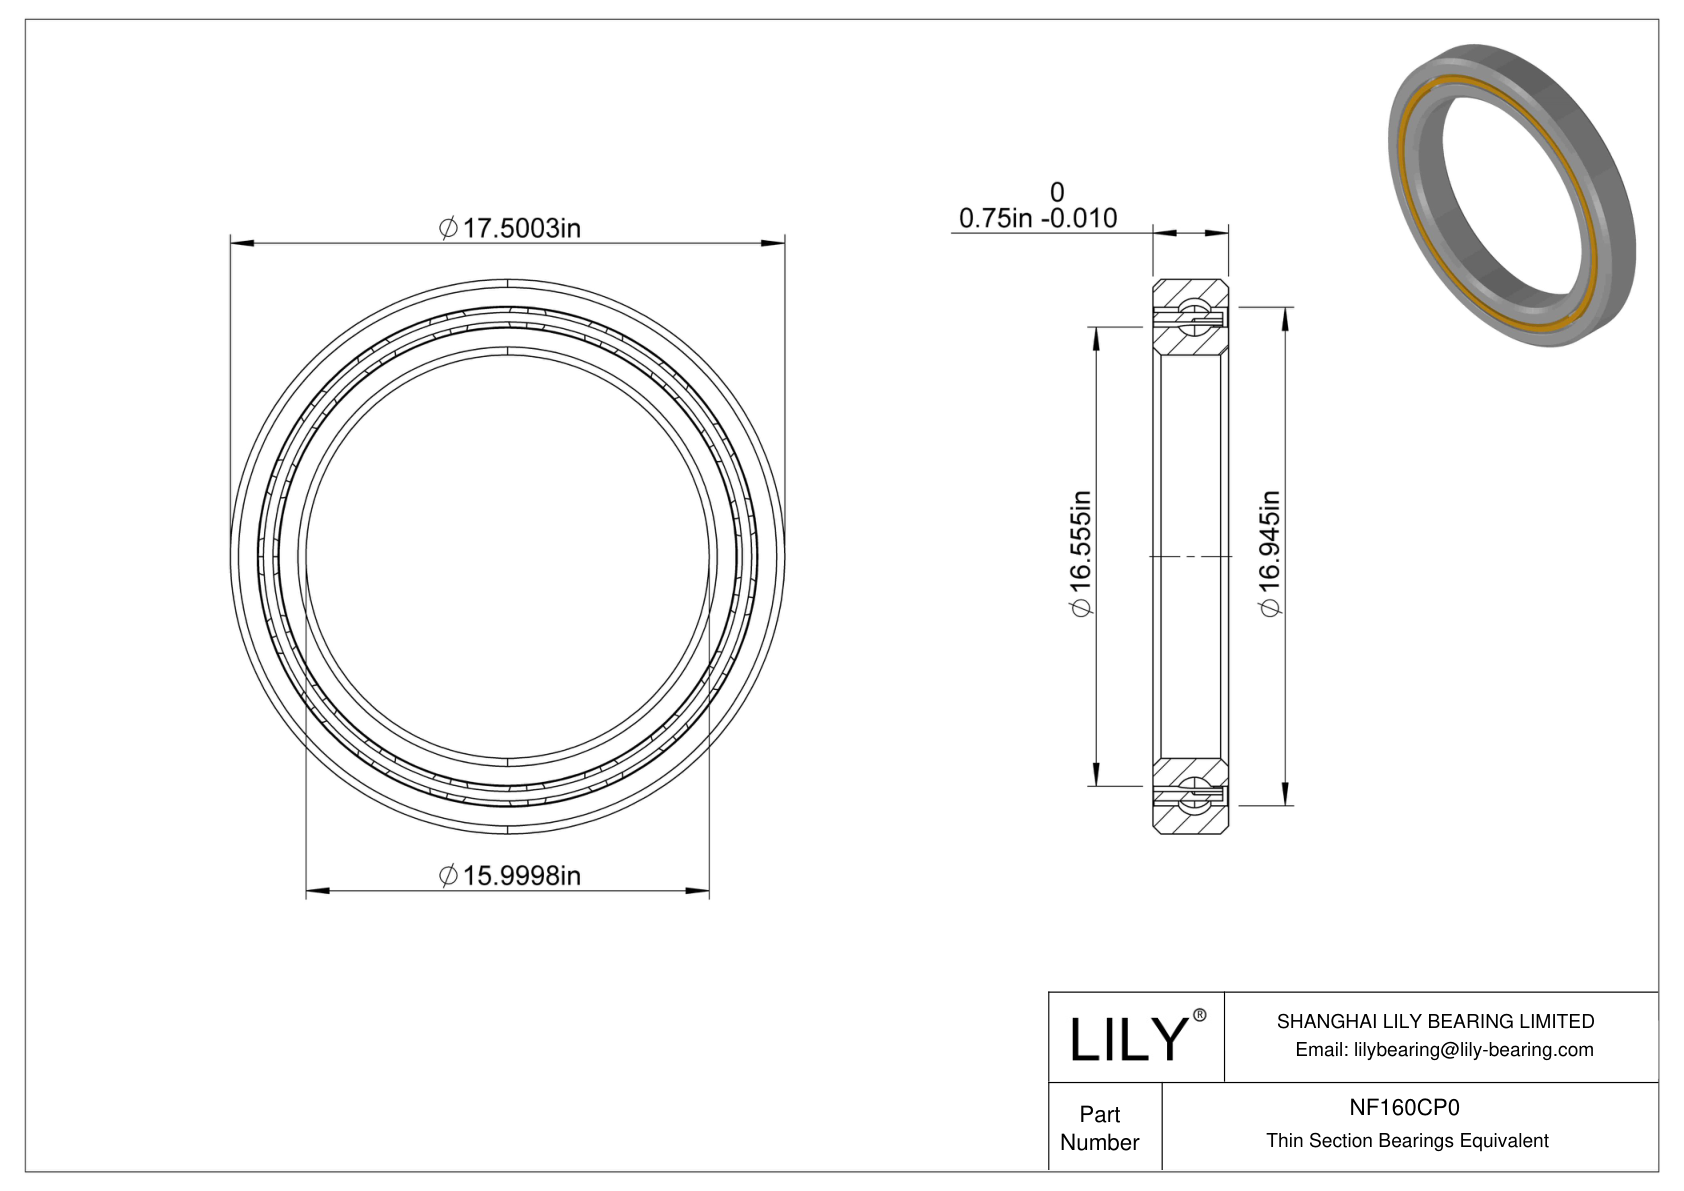 NF160CP0 Constant Section (CS) Bearings cad drawing